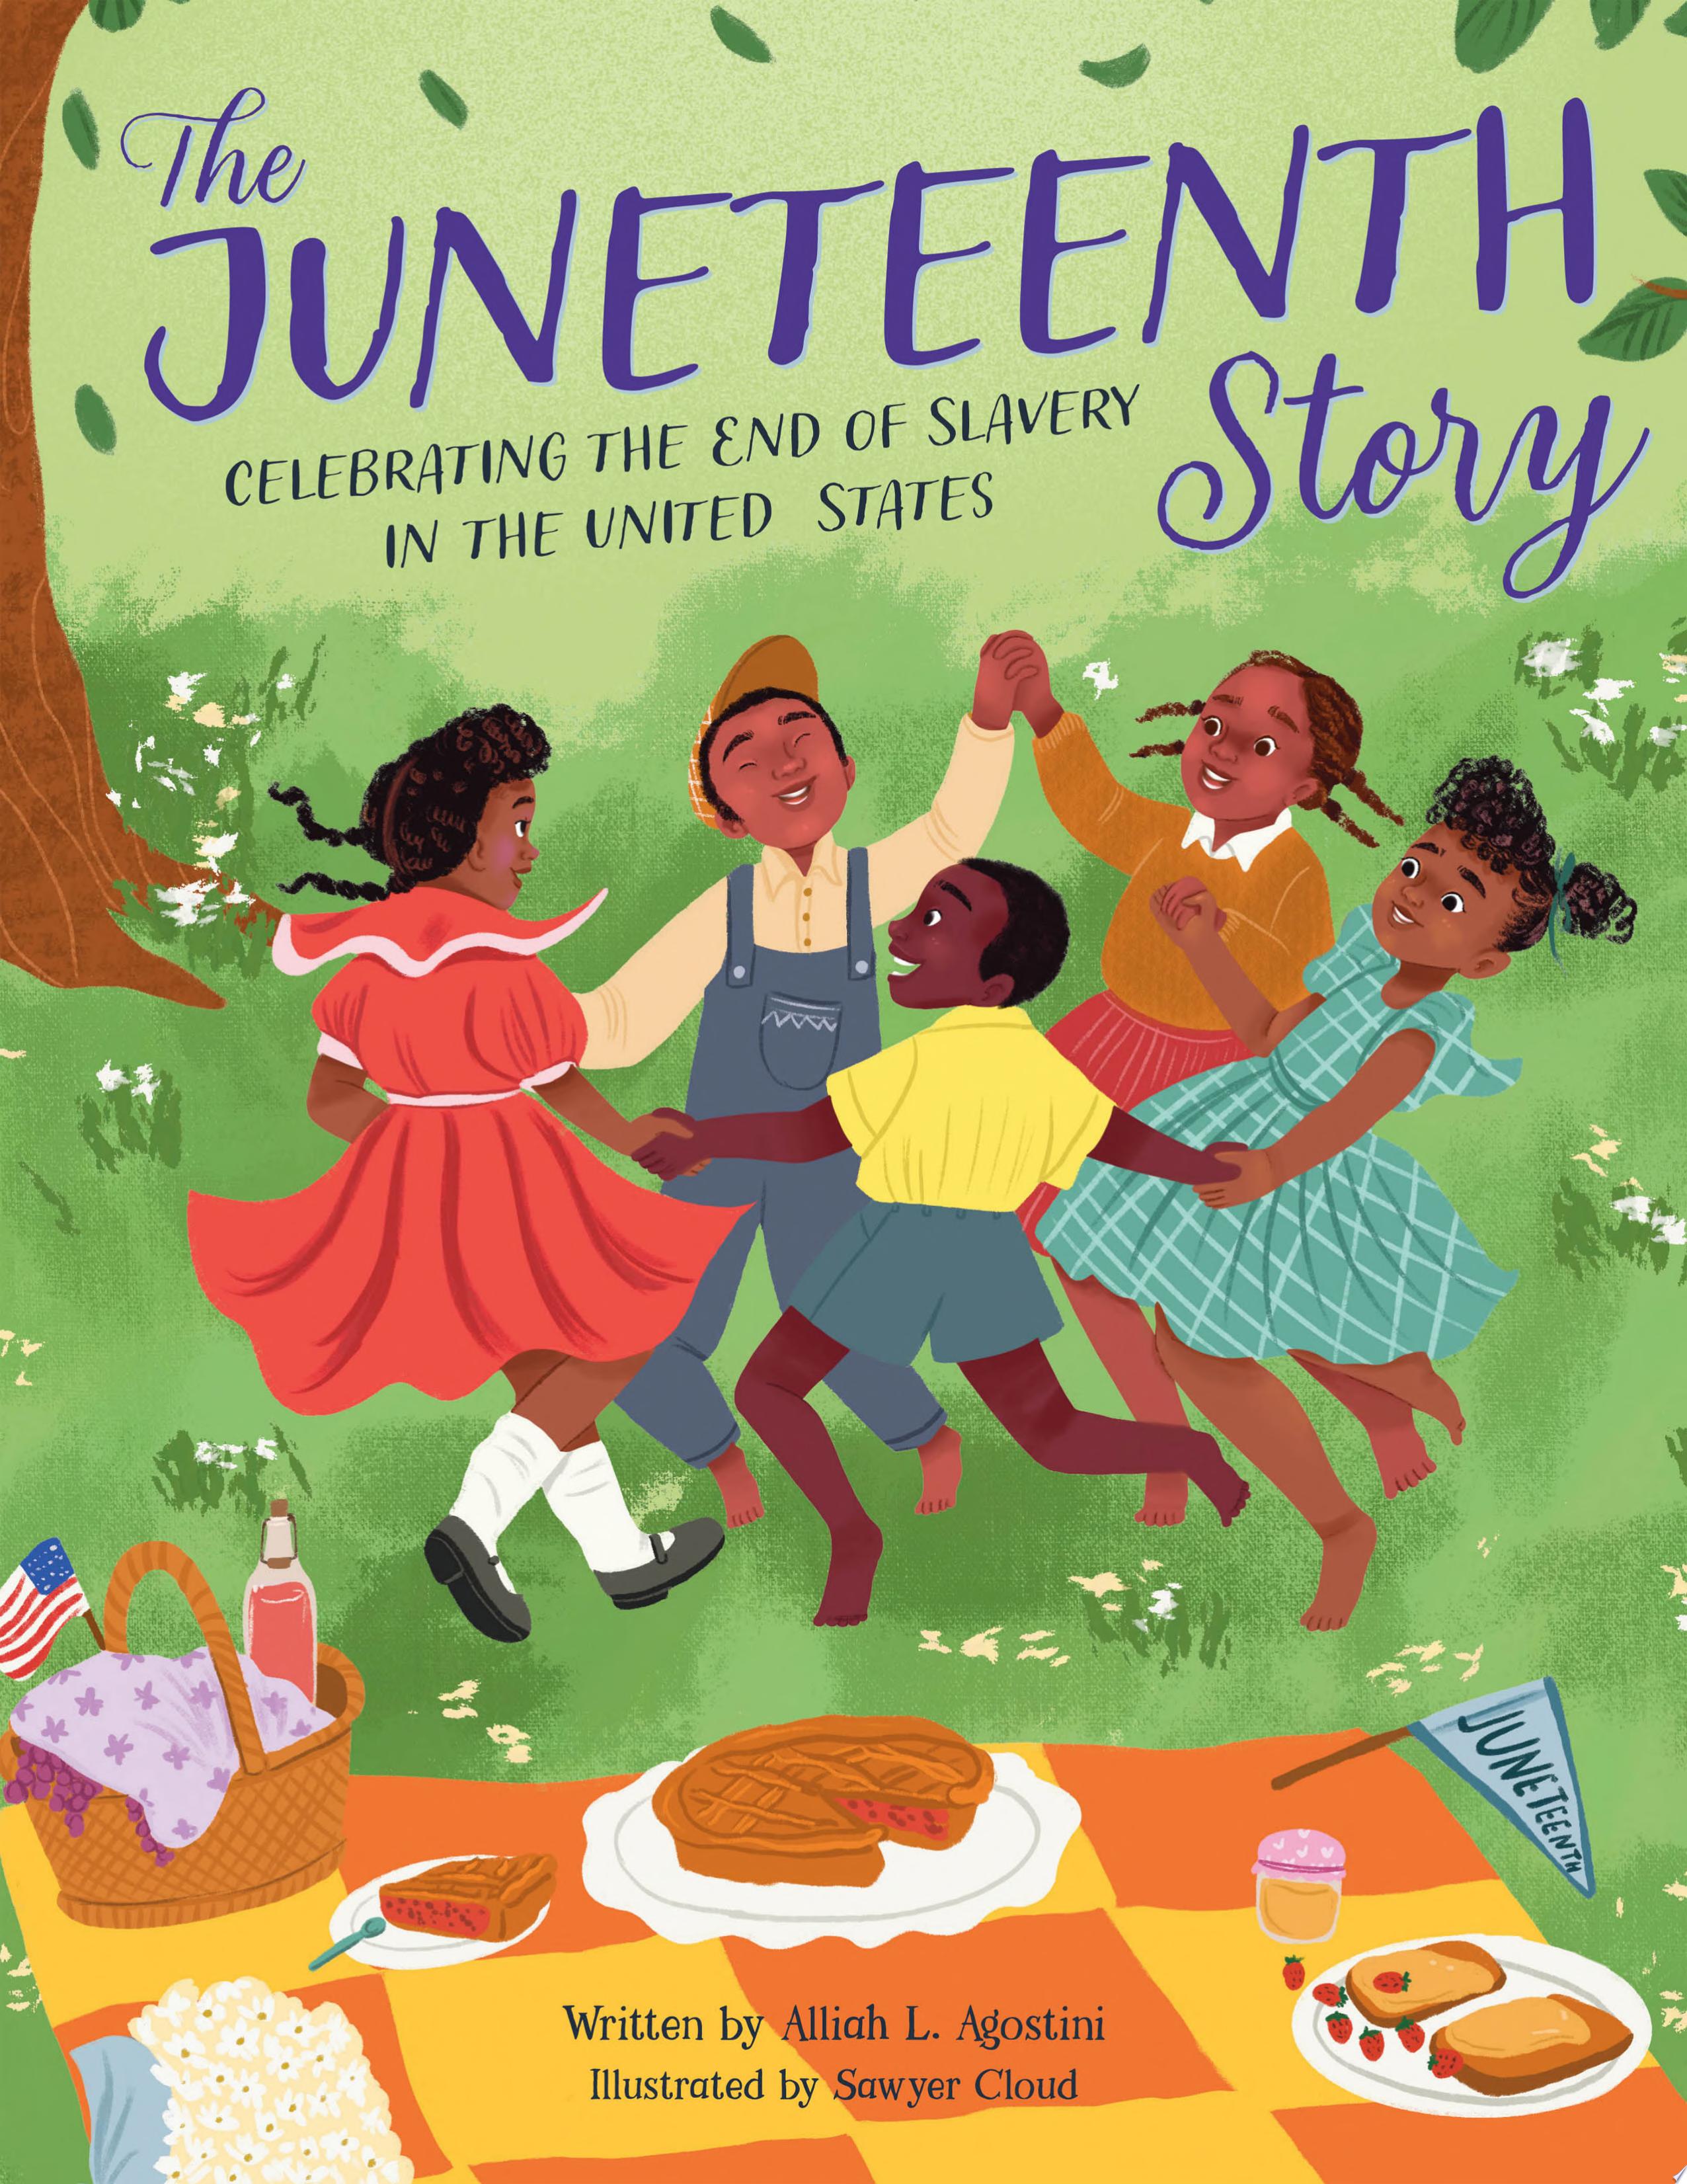 Image for "The Juneteenth Story"